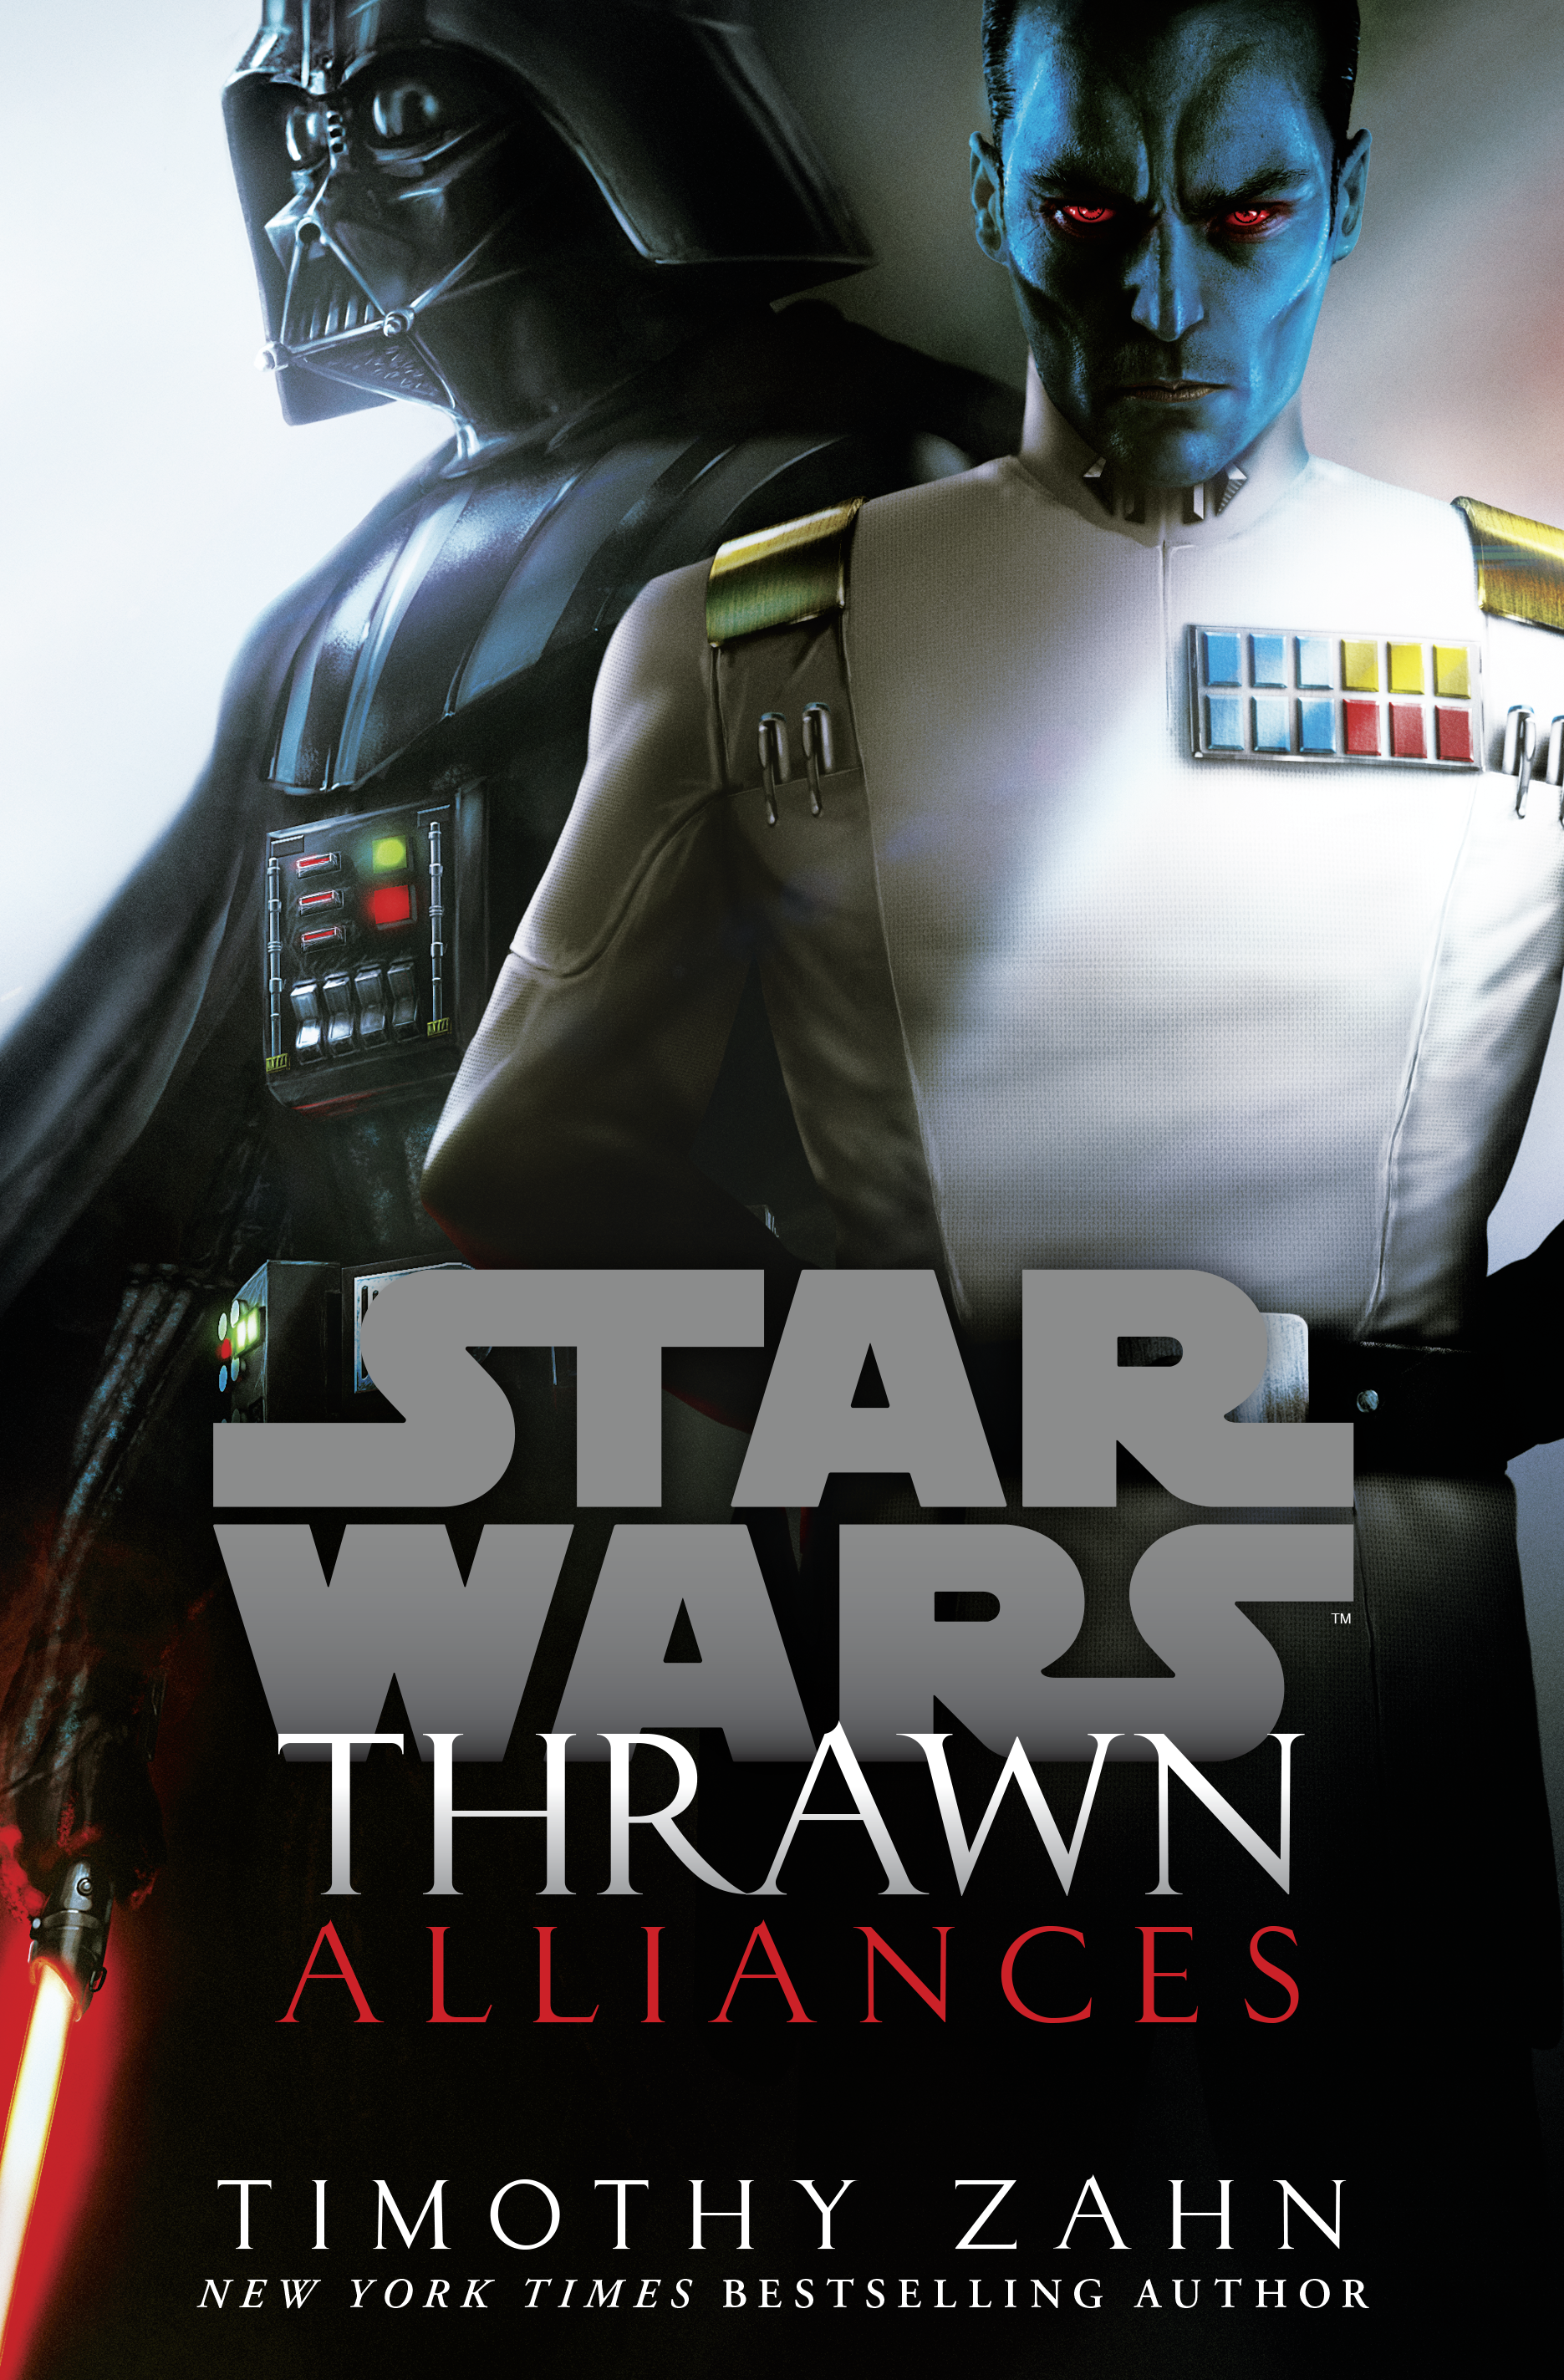 https://static.wikia.nocookie.net/starwars/images/c/c8/Thrawn_Alliances_cover.png/revision/latest?cb=20200826220634